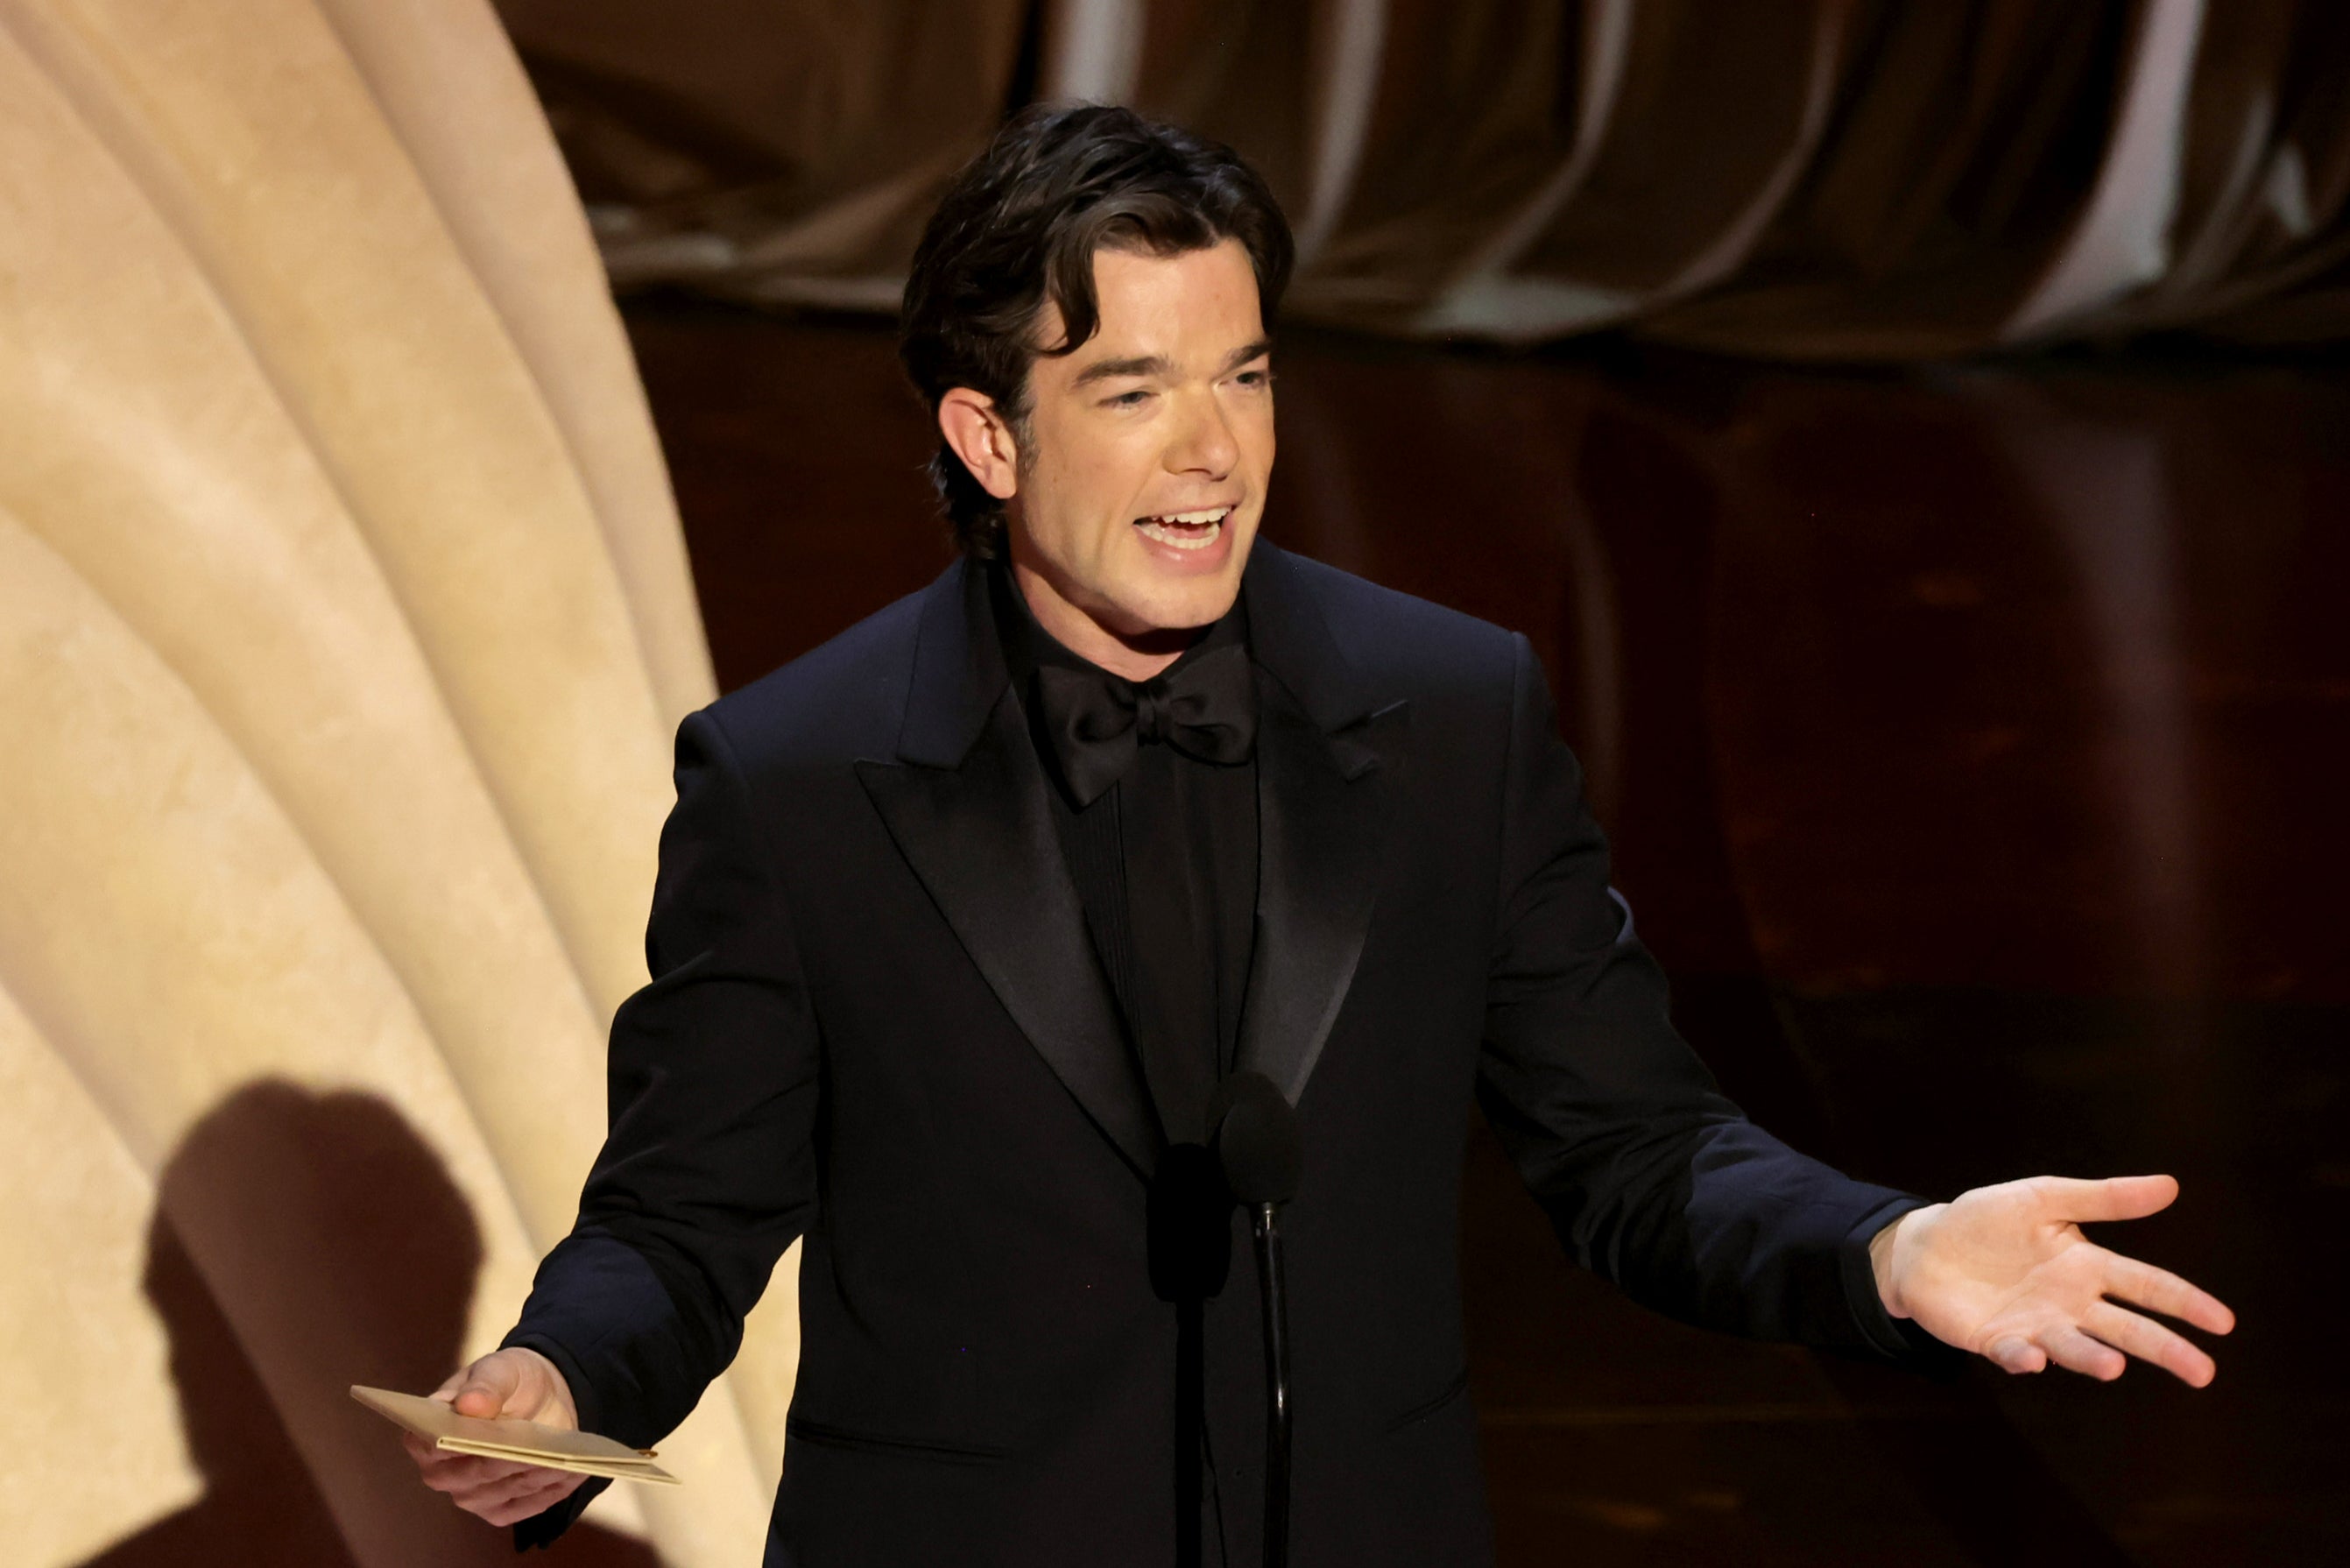 John Mulaney will perform a stand-up special live on Netflix